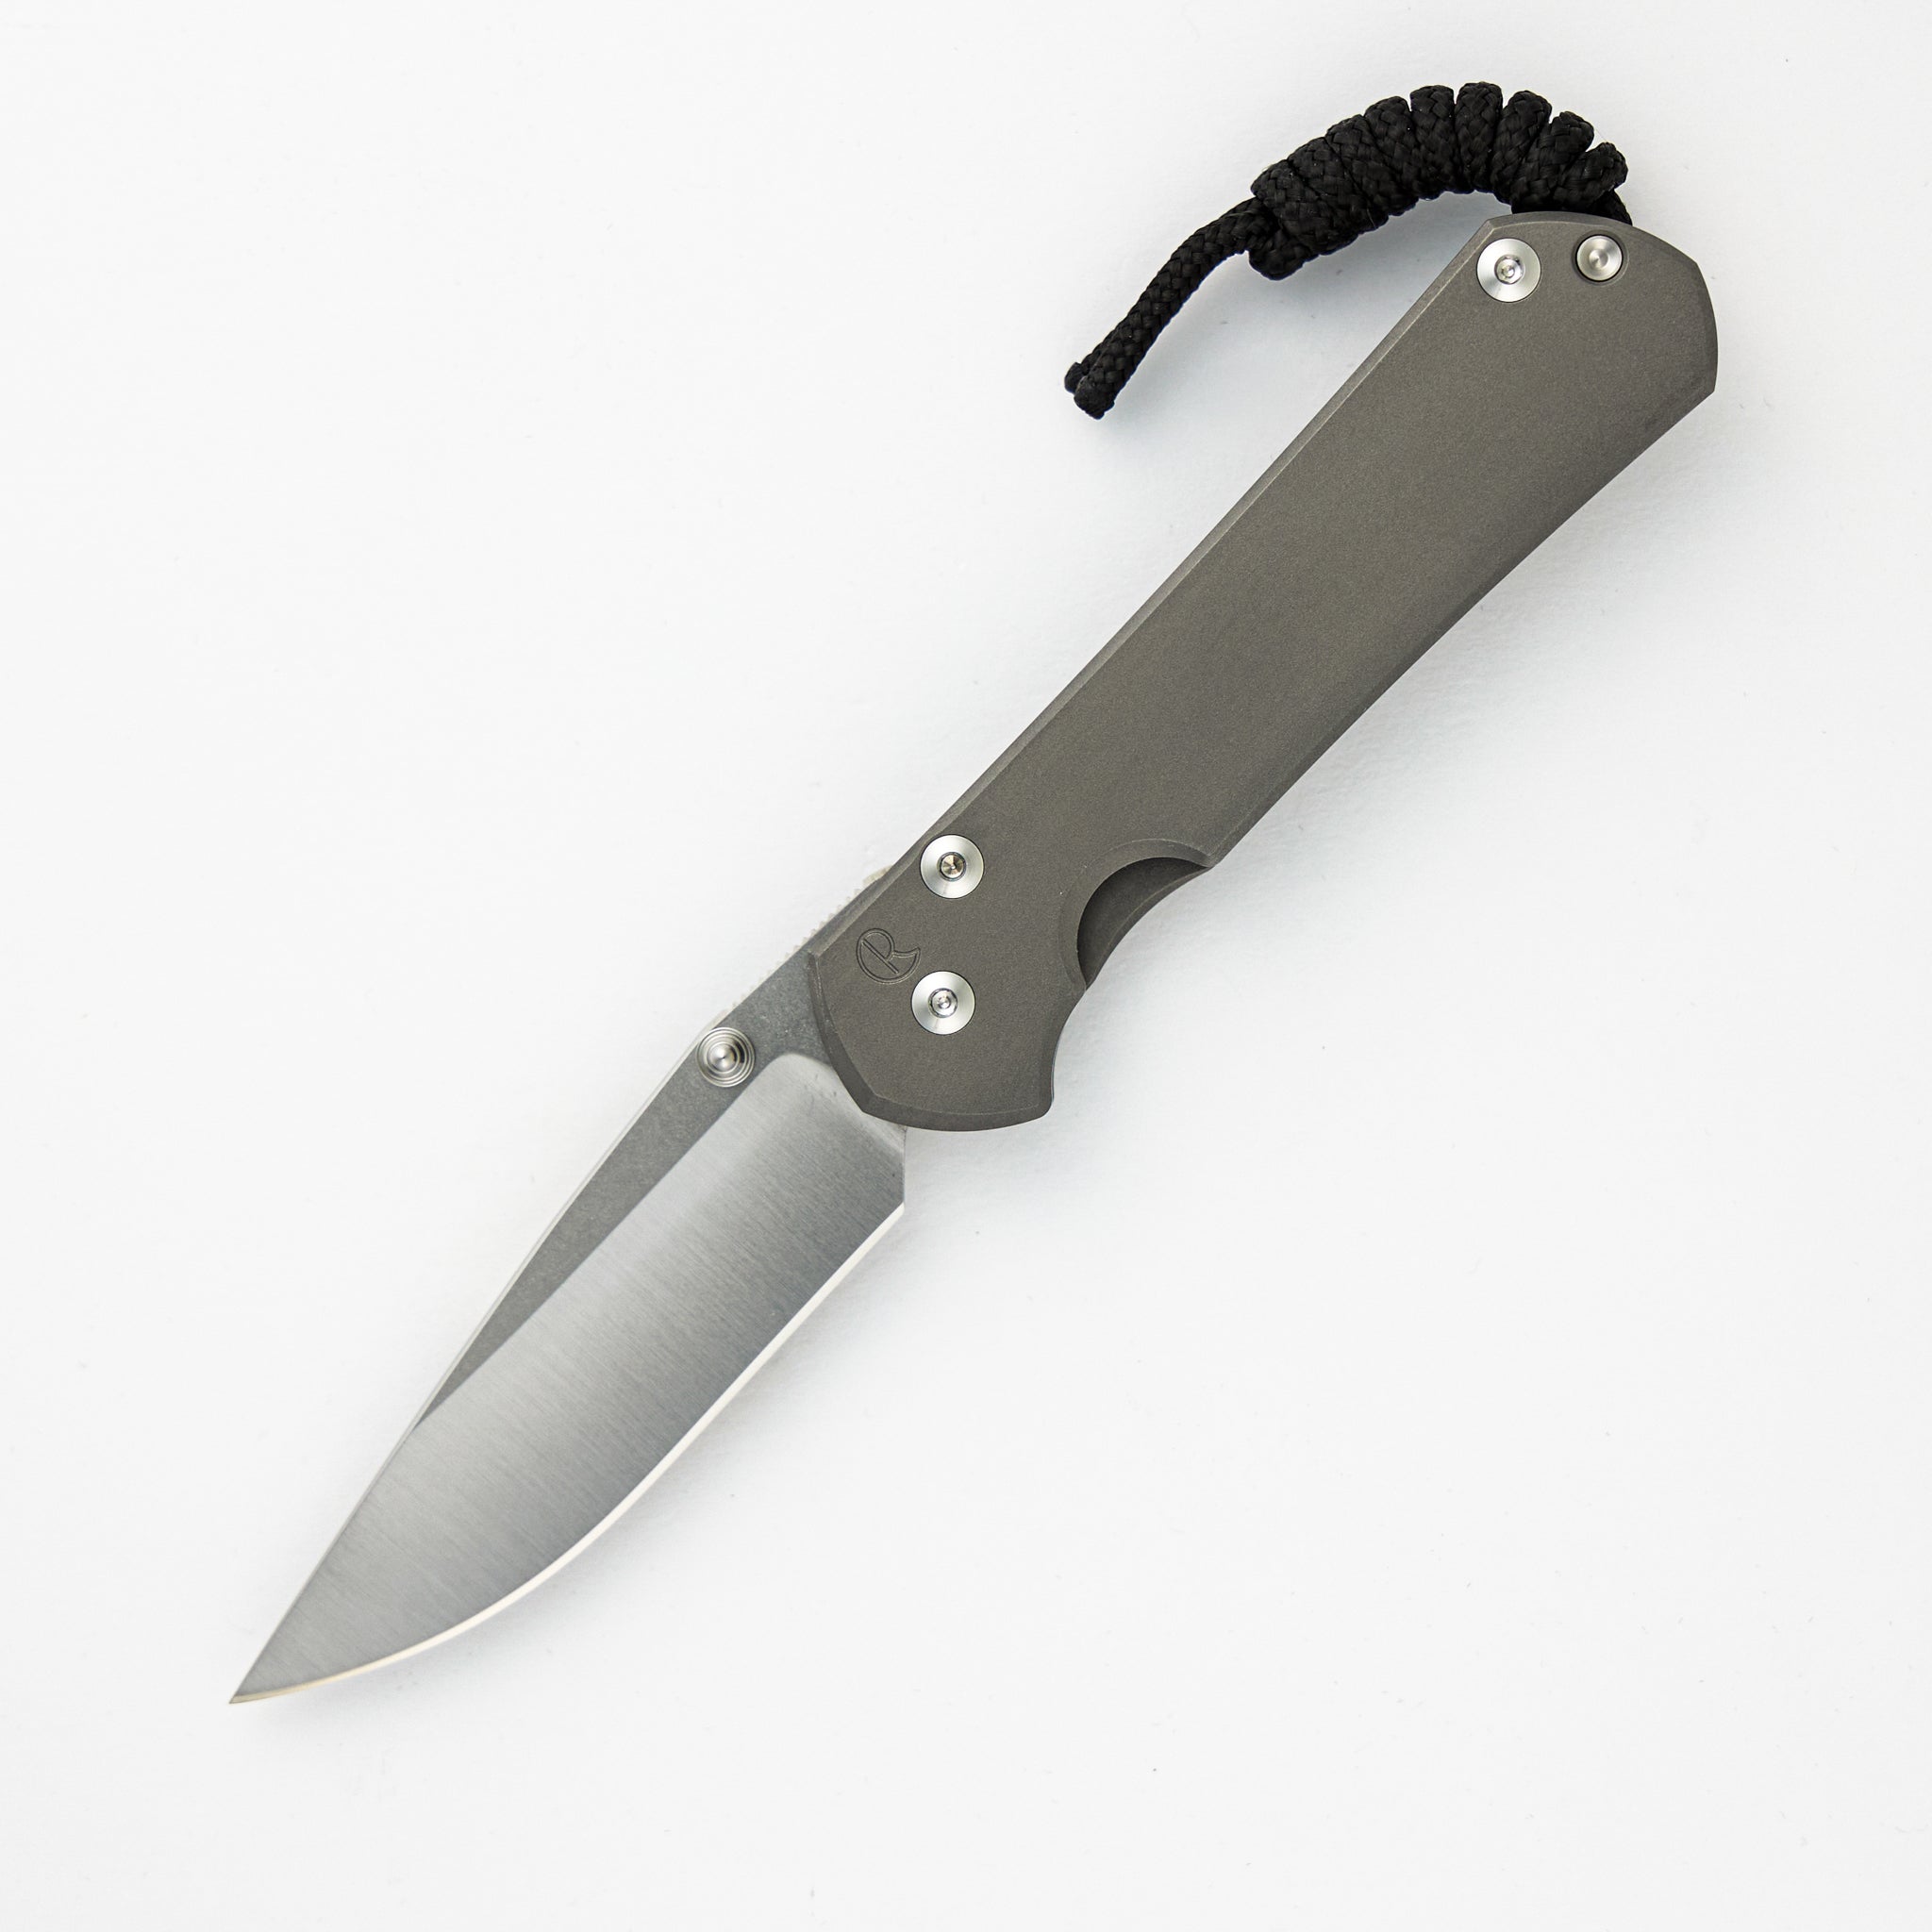 Chris Reeve Small Sebenza 31 - Polished Drop Point CPM MagnaCut Blade - Glass Blasted - Silver Double Thumb Lugs